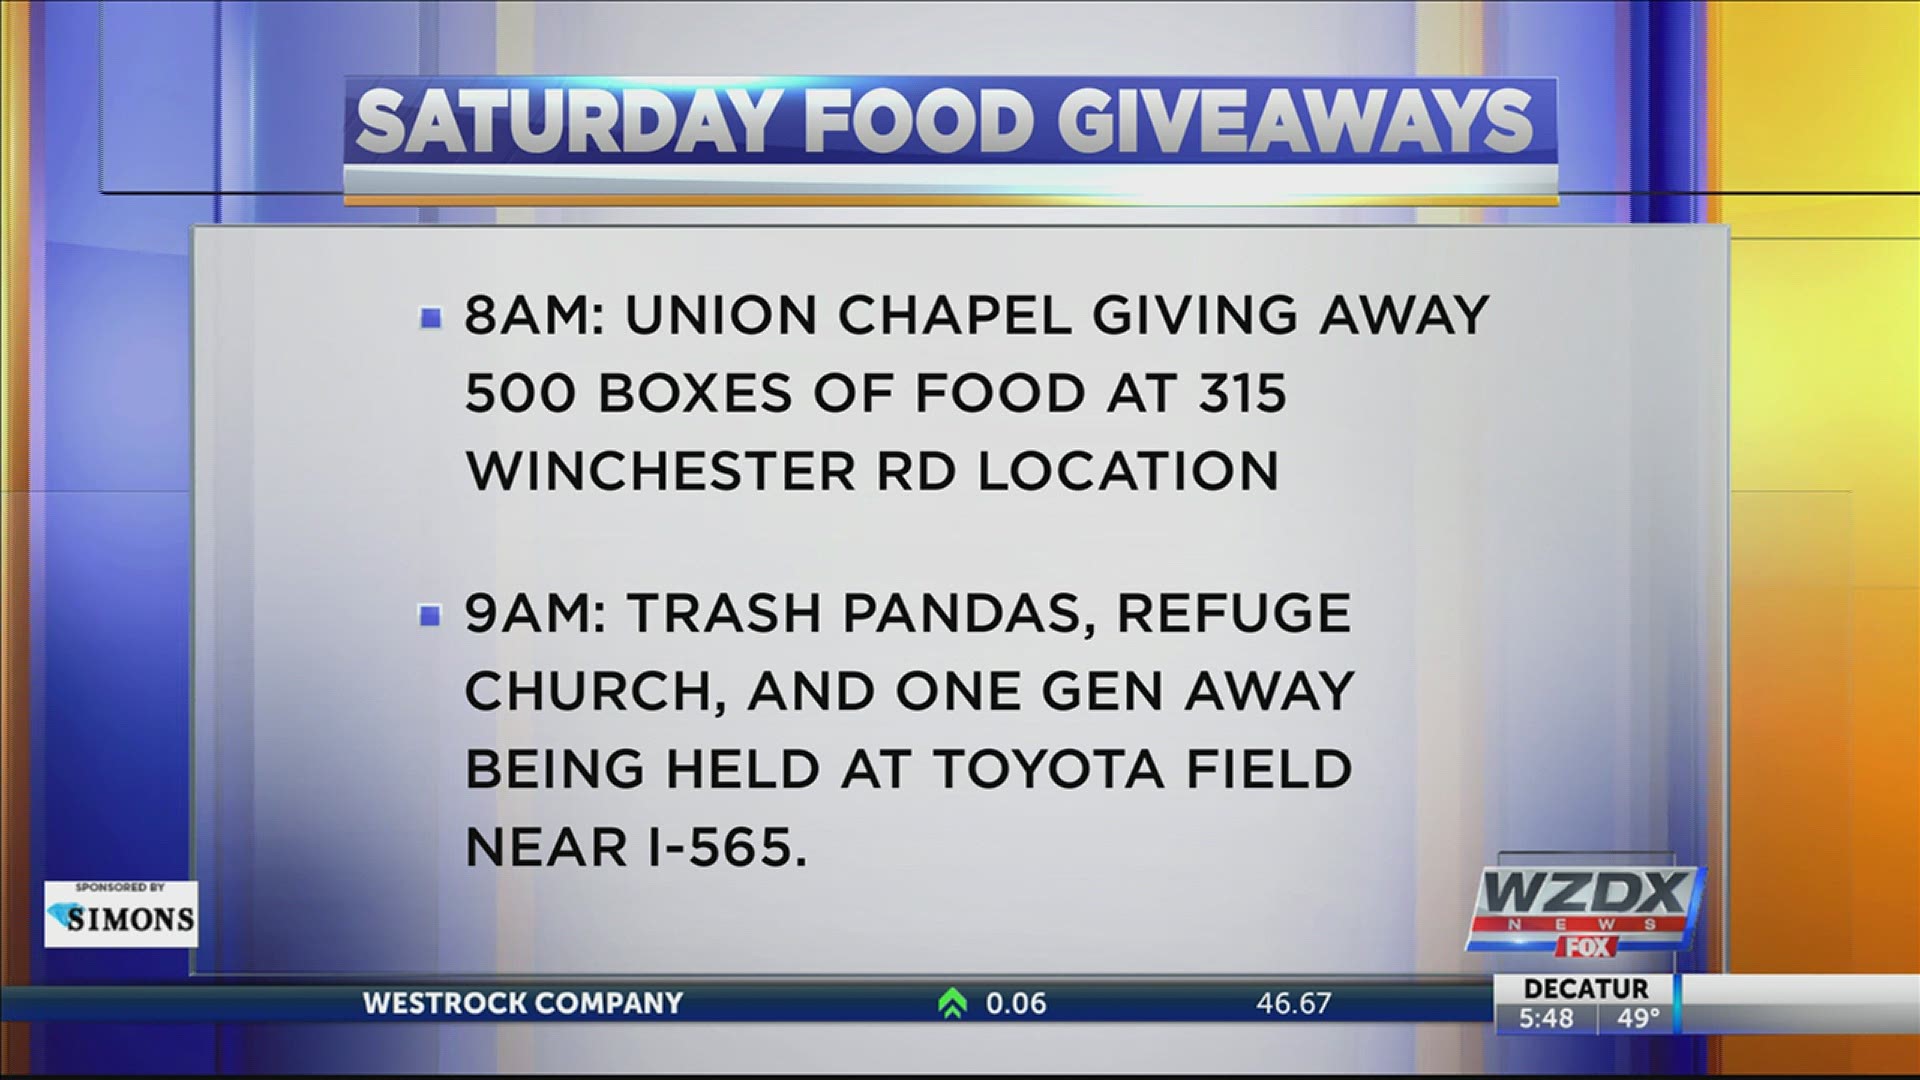 Need food help for yourself or your family? Two free grocery giveaways are happening on Sat., Jan. 23.